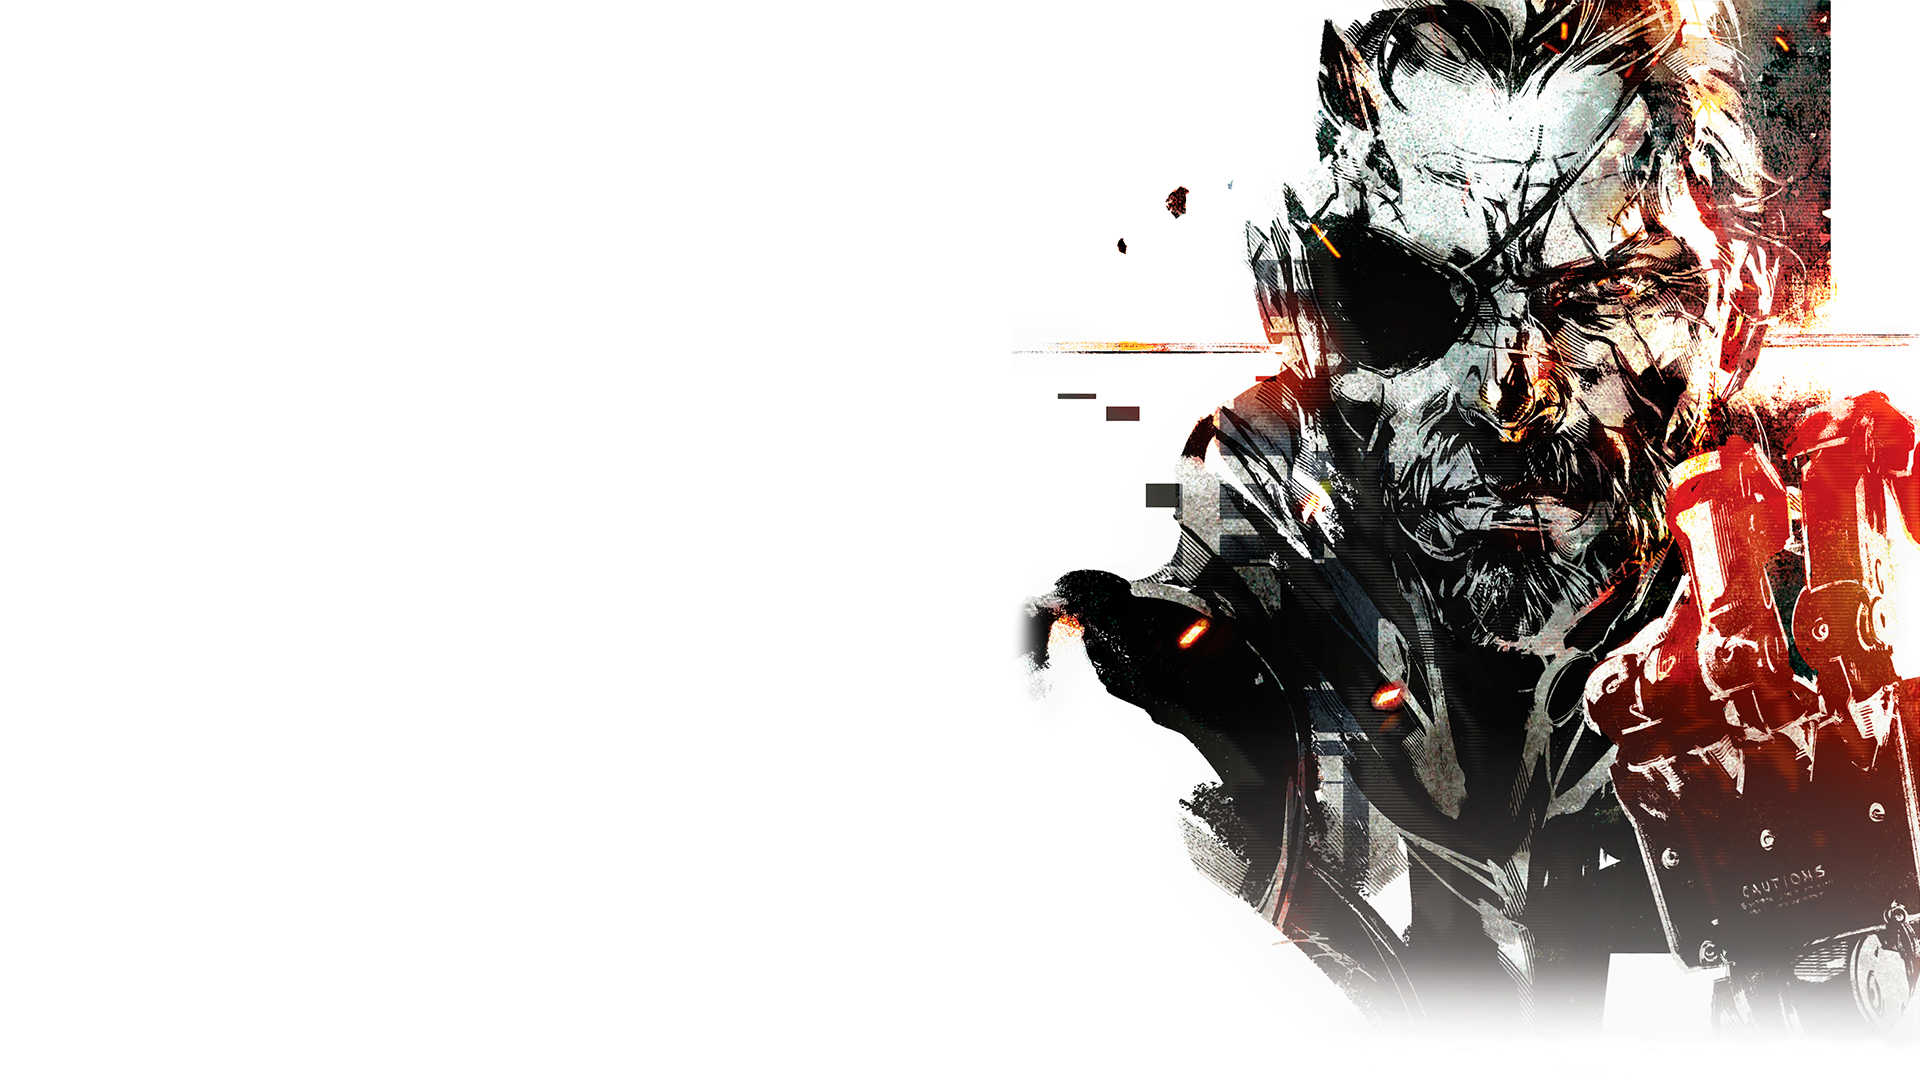 Metal Gear Solid V: The Phantom Pain Wallpapers - PlayStation Universe